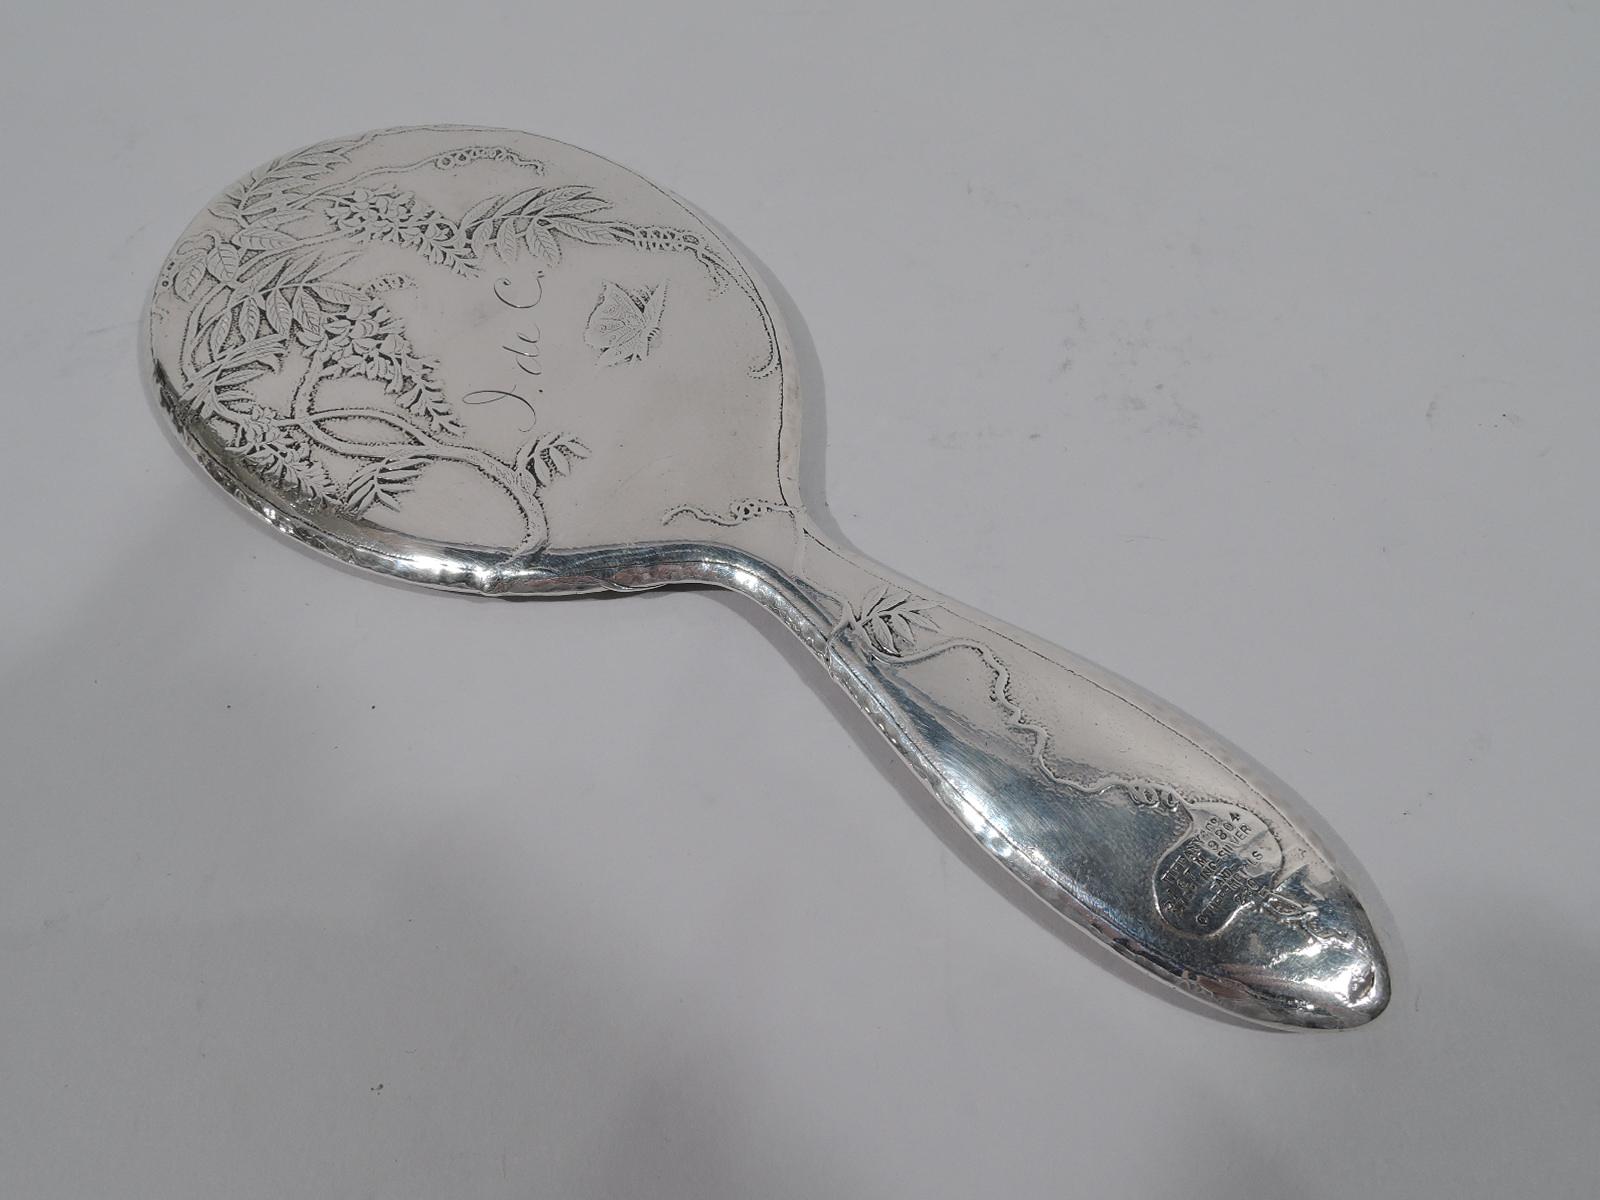 Japonesque sterling silver and mixed metal hand mirror. Made by Tiffany & Co. in New York, ca 1878. Curved and upward tapering handle and oval frame inset with beveled glass. Front has honeycomb hand hammering and is applied with modish insects